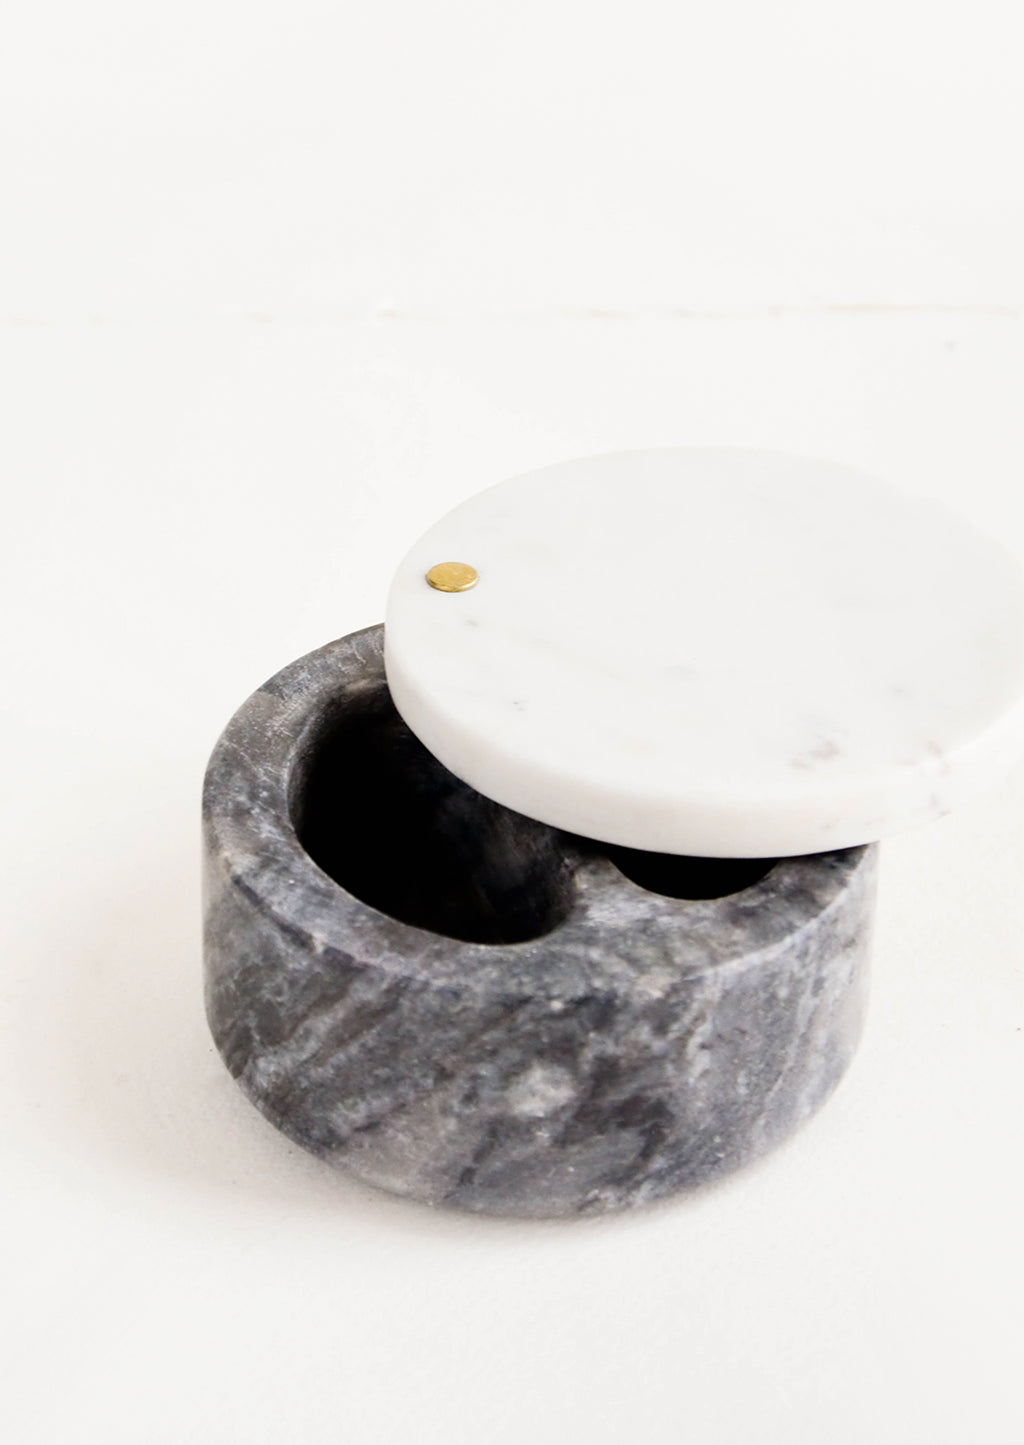 2: Round salt cellar made of black marble with pivoting white marble lid